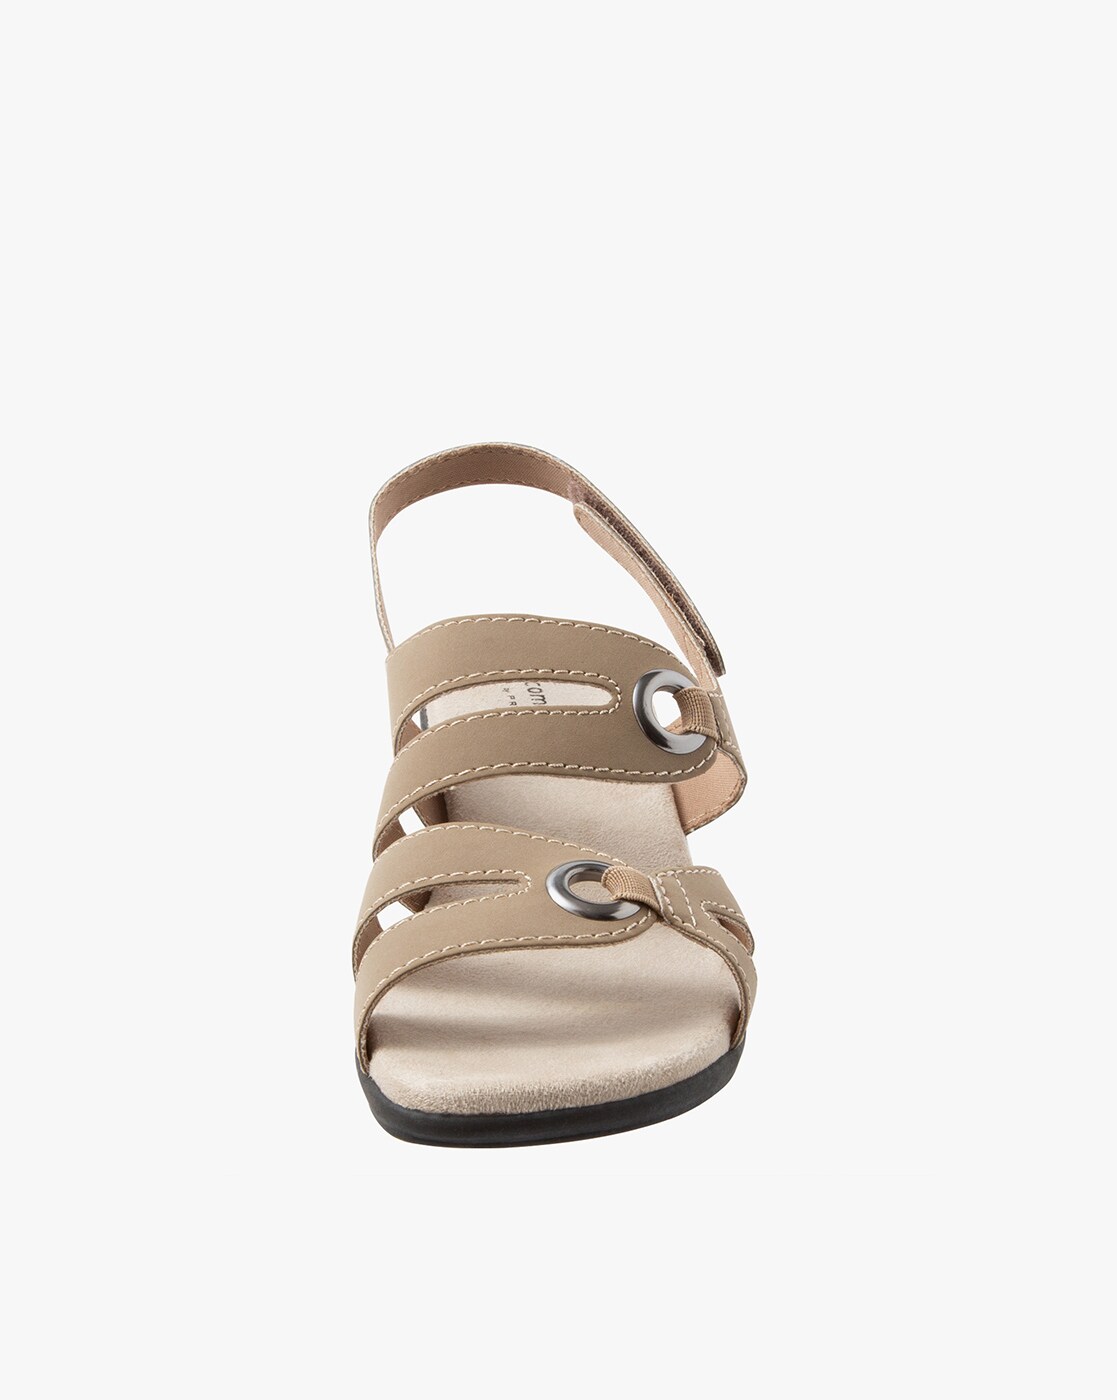 Bayshore Mall - Payless is having a great sale on sandals! We're giving  away a $50 Payless ShoeSource Gift Card! To enter, simply comment on this  post on our Facebook page with